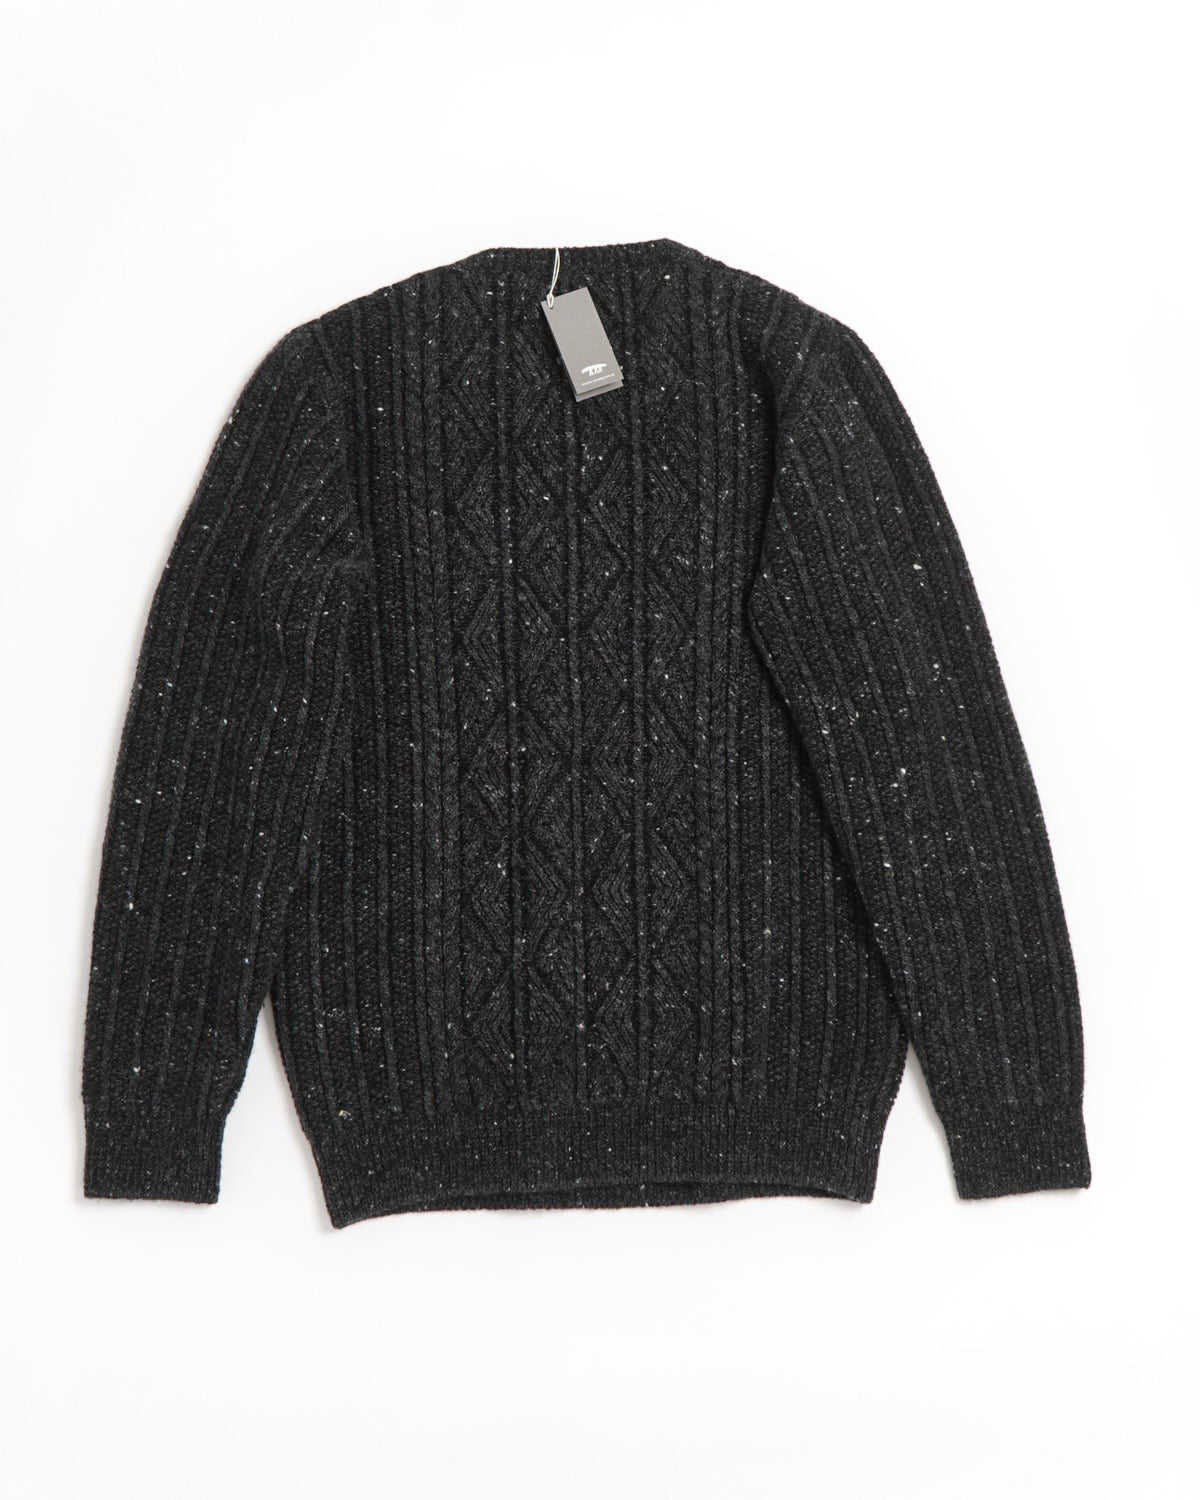 Wool Cashmere Donegal Patent Aran Cable Crewneck Sweater